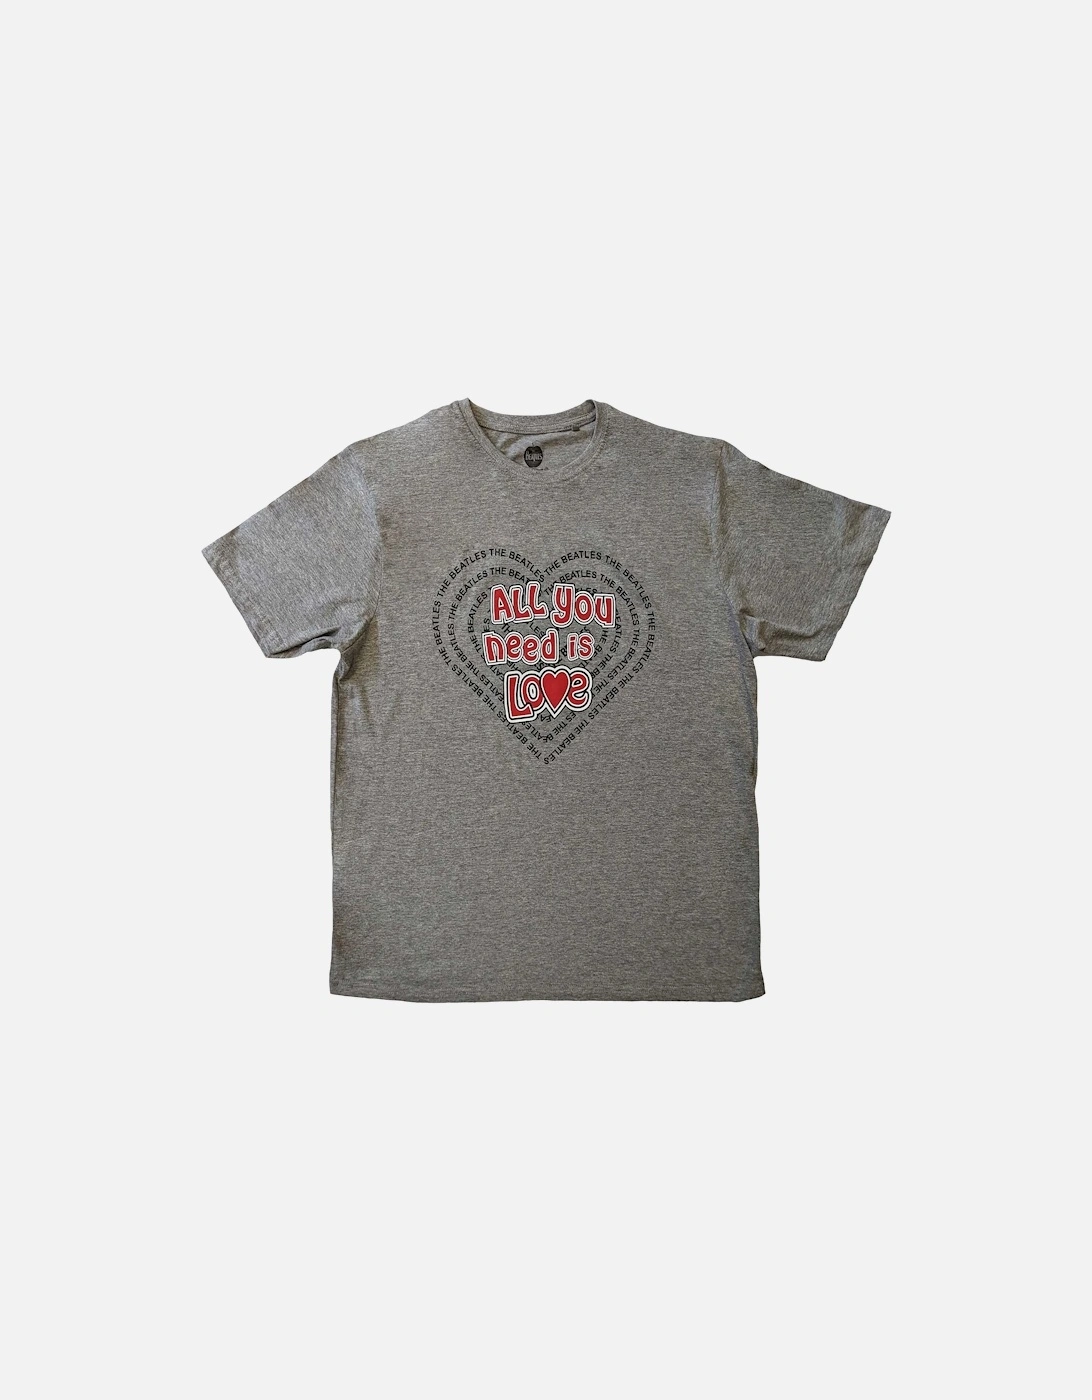 Unisex Adult All You Need Is Love Heart Cotton T-Shirt, 2 of 1